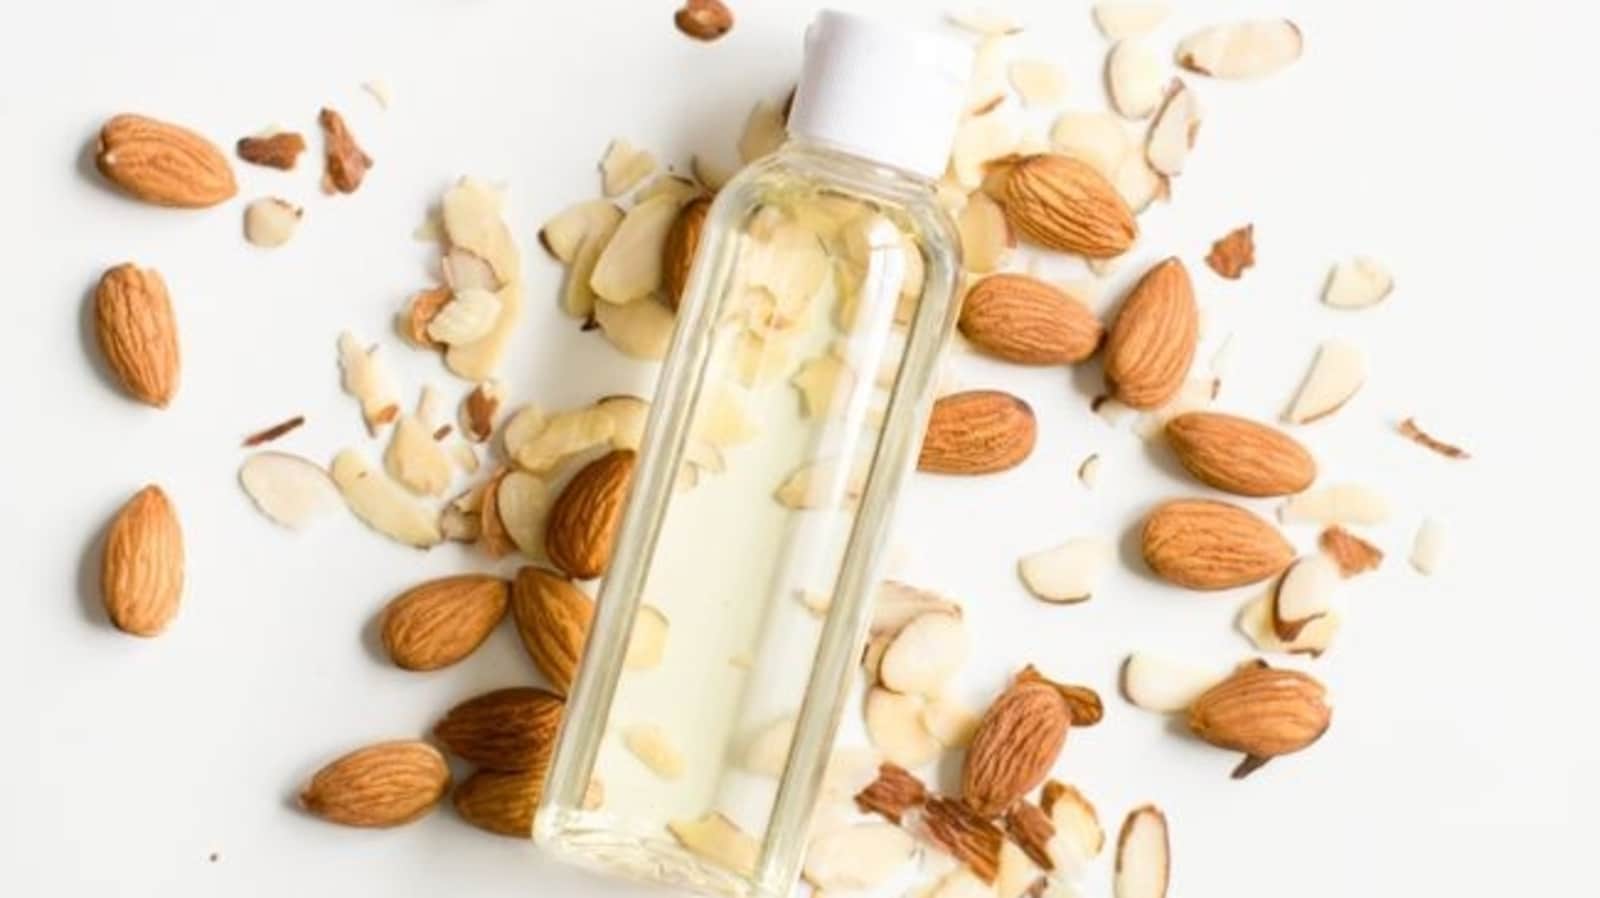 Want radiant skin and prevent premature ageing? Follow this morning skincare routine with almonds for healthy glow